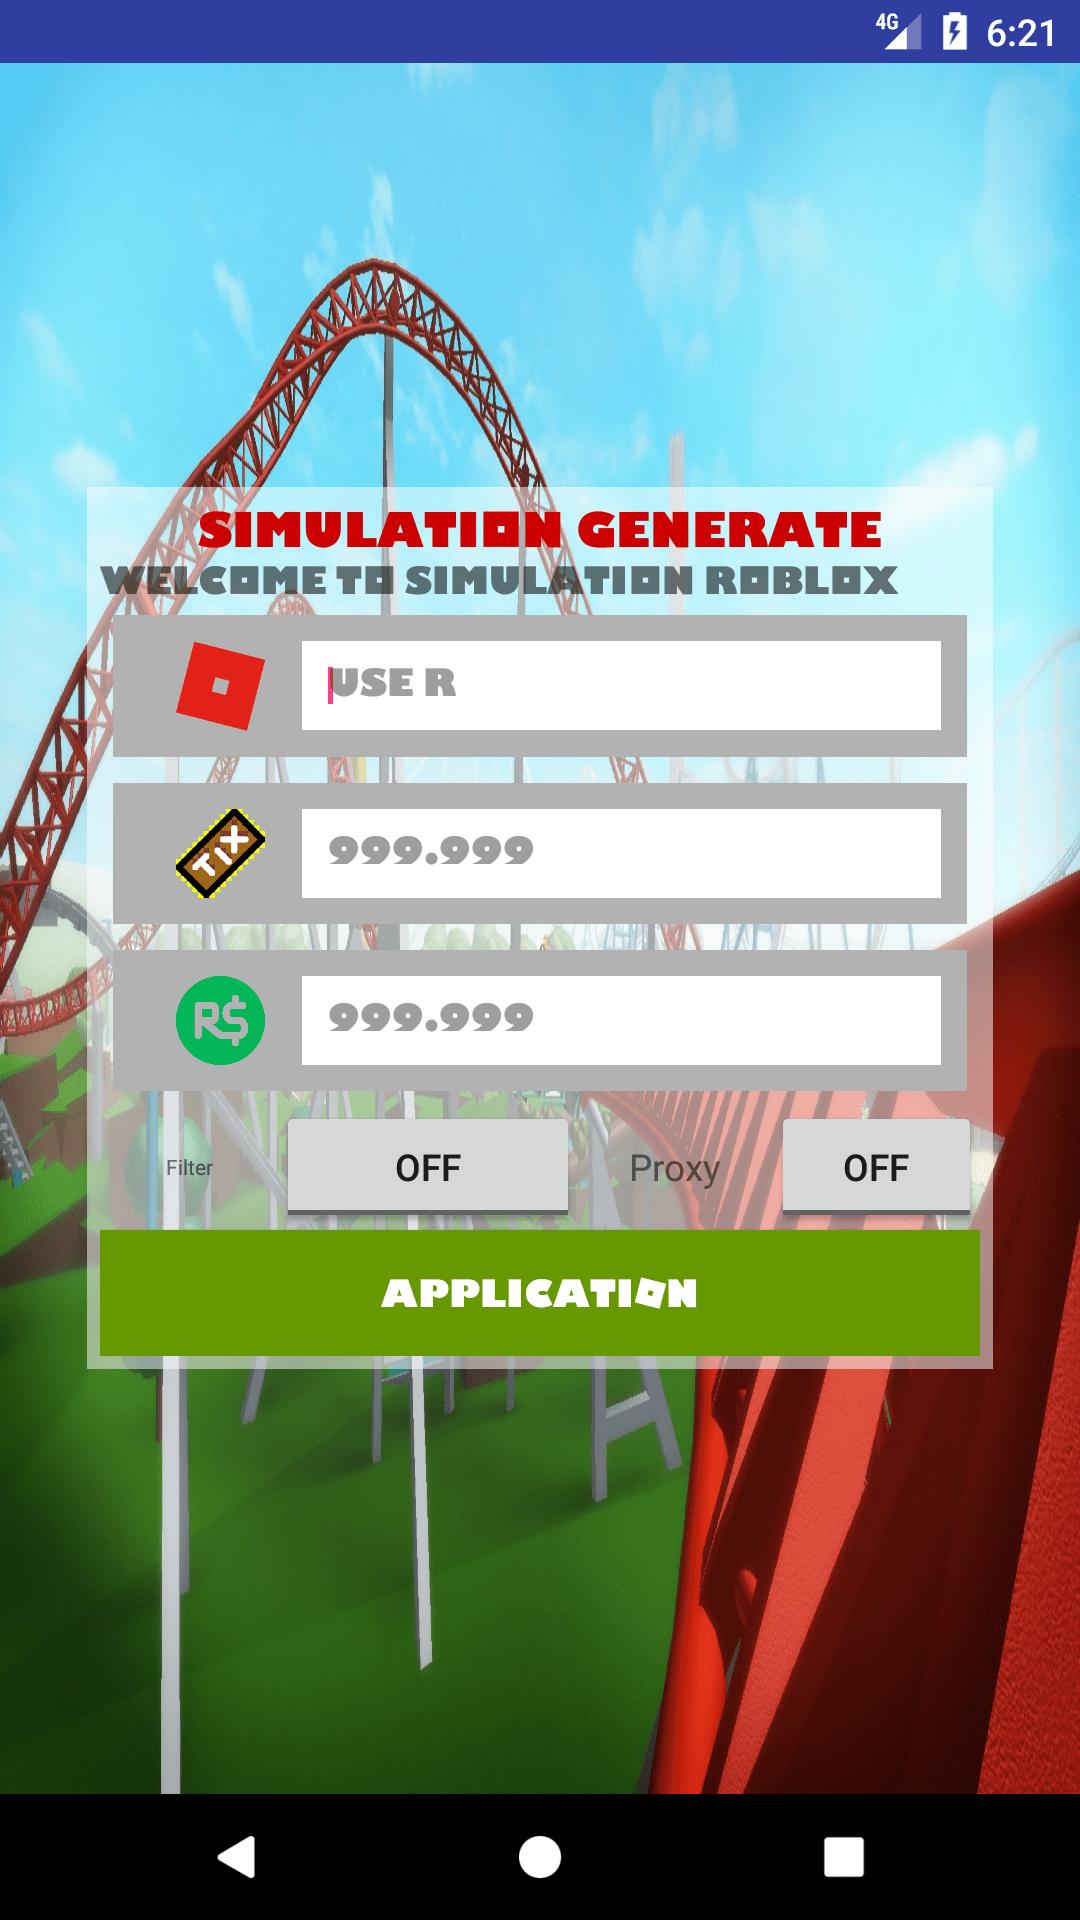 Roblox unlimited robux apk 2020